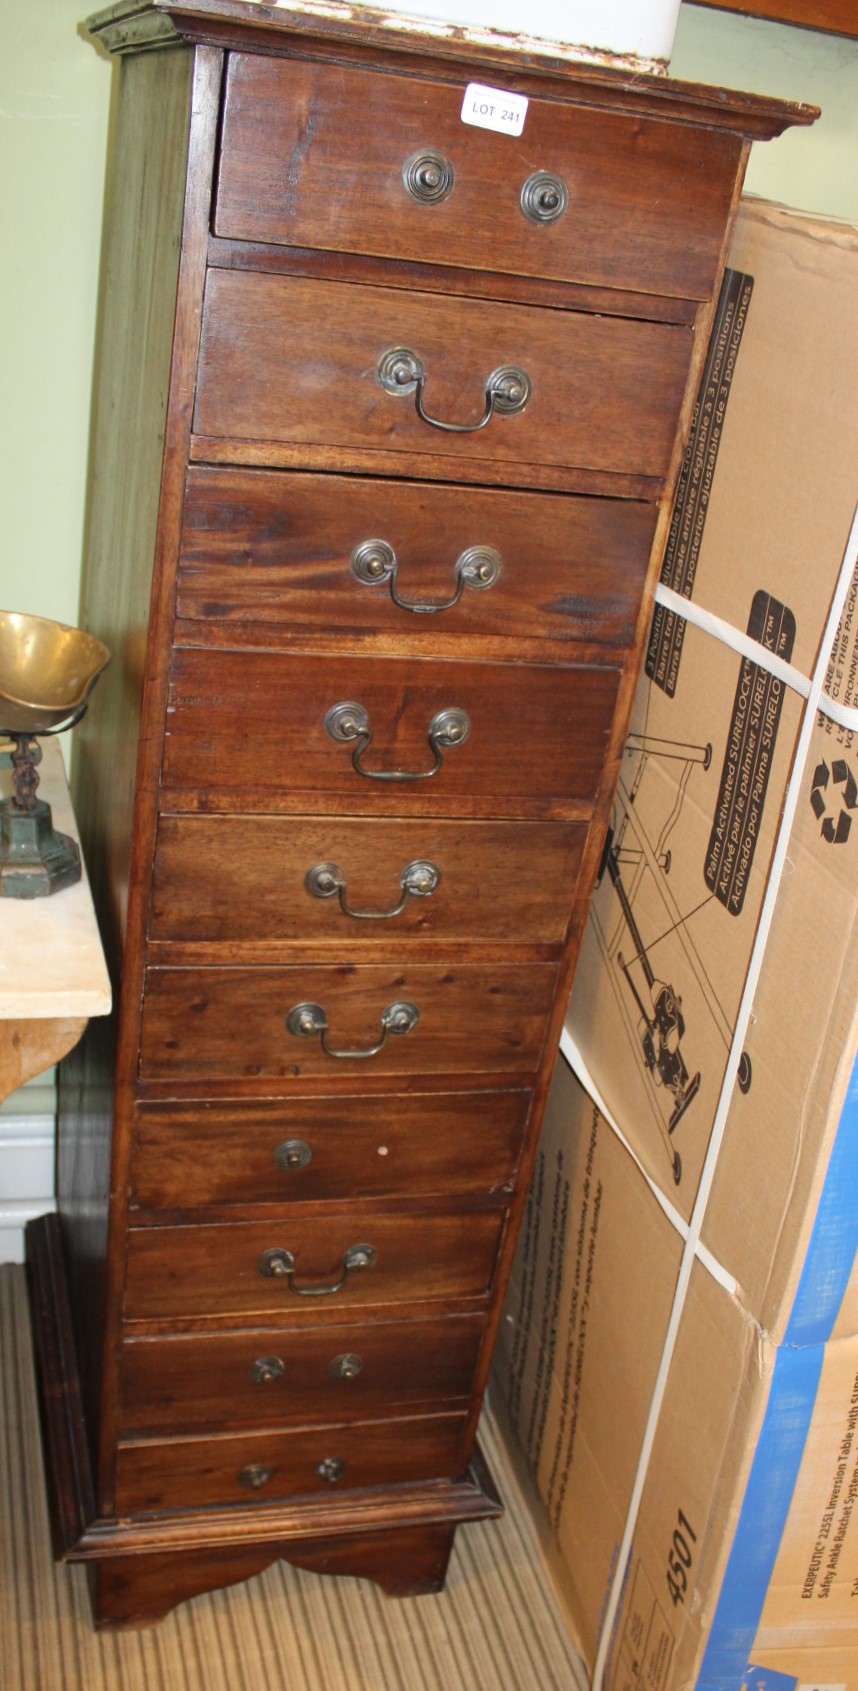 AN IMPORTED MAHOGANY COLOURED TALL CHEST OF TEN DRAWERS